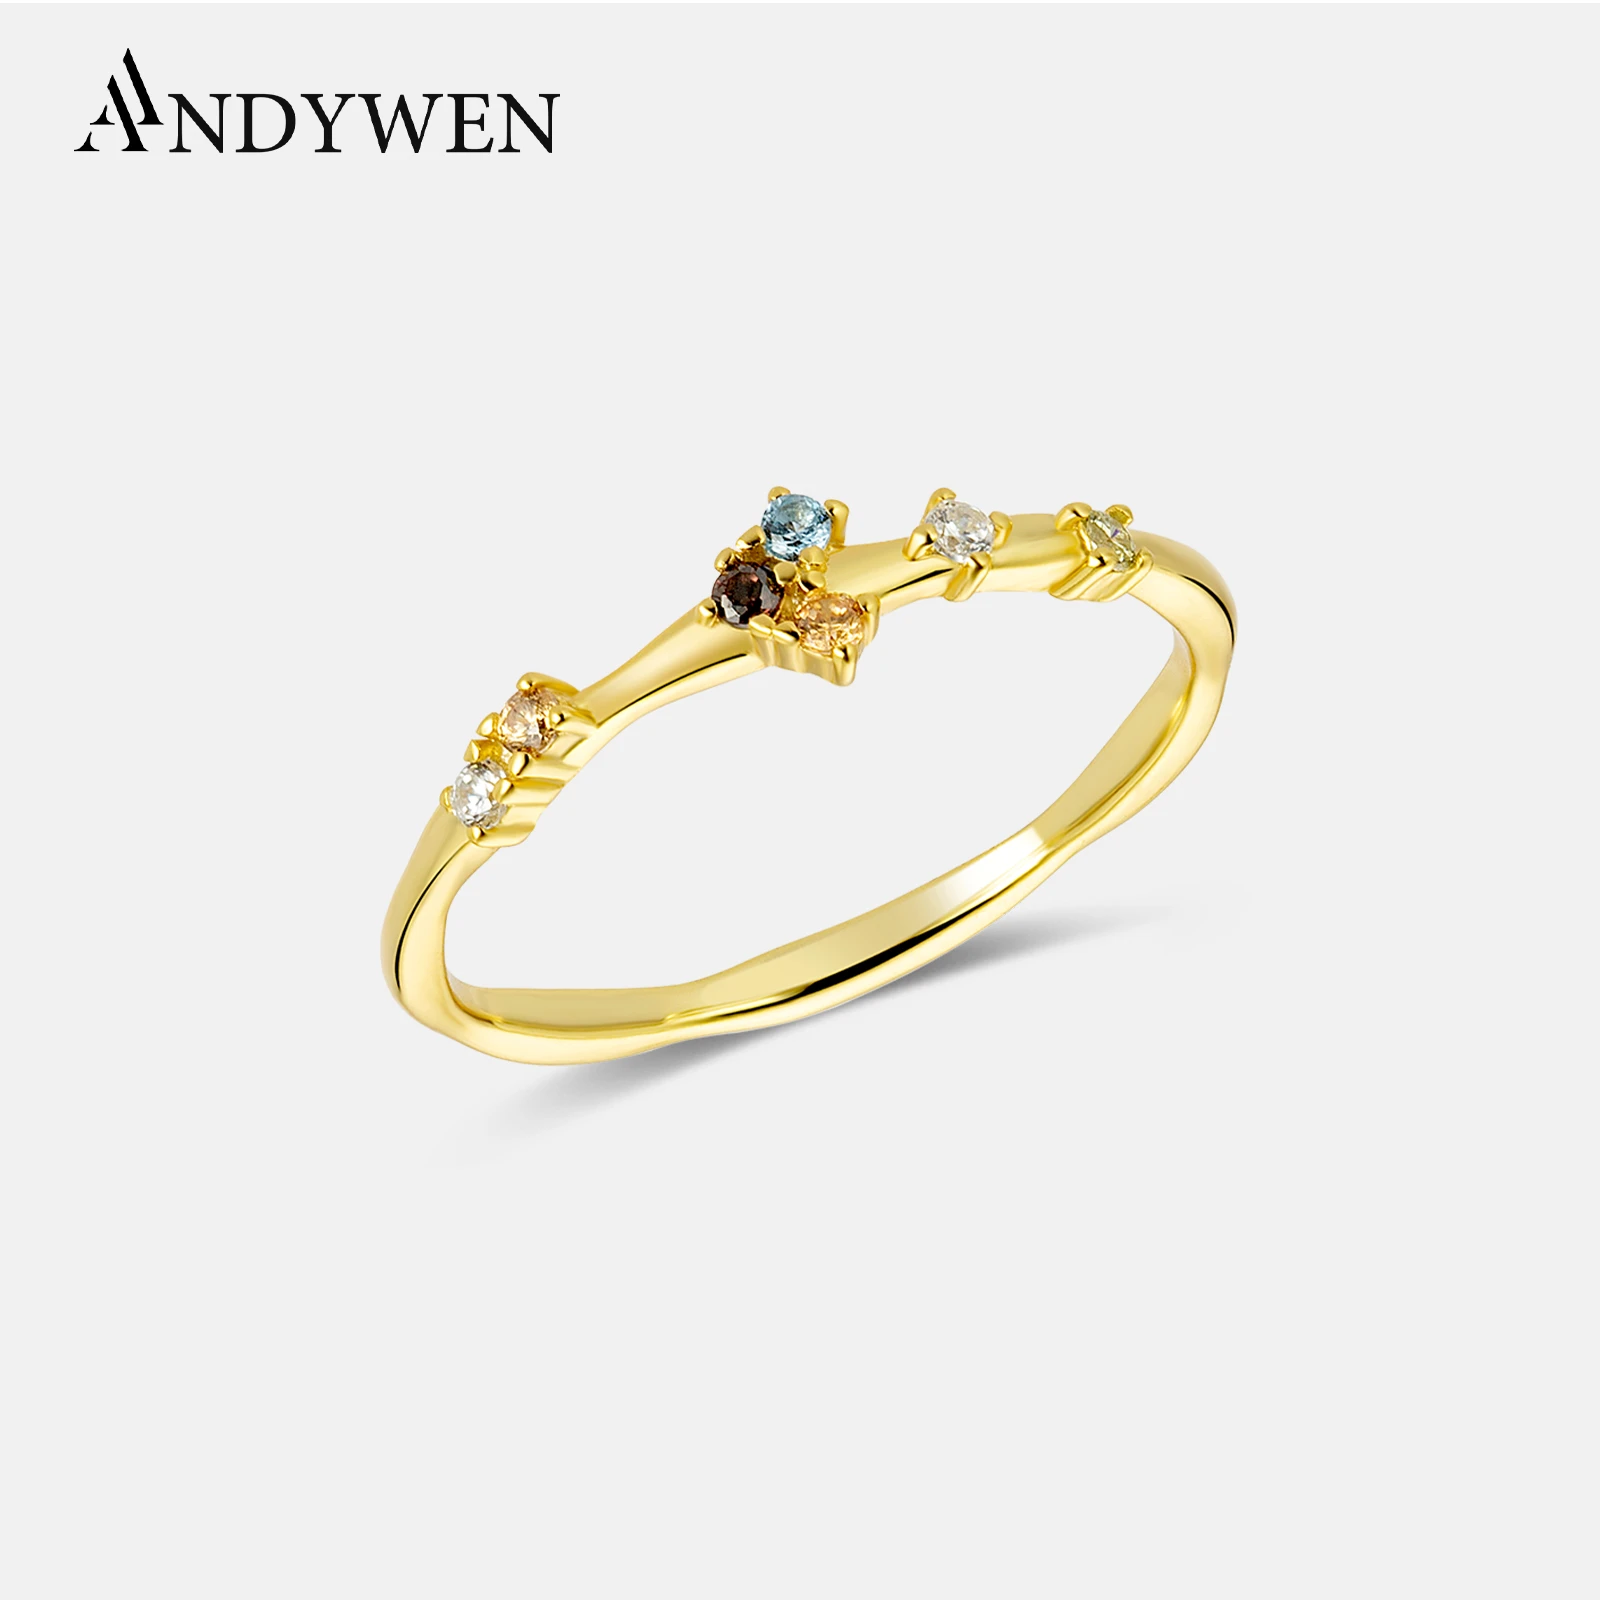 ANDYWEN 925 Sterling Silver Gold Five Gold Ring Full Zircon CZ Lady Bird Ring Women Wedding Jewelry Rock Punk Round Jewelry